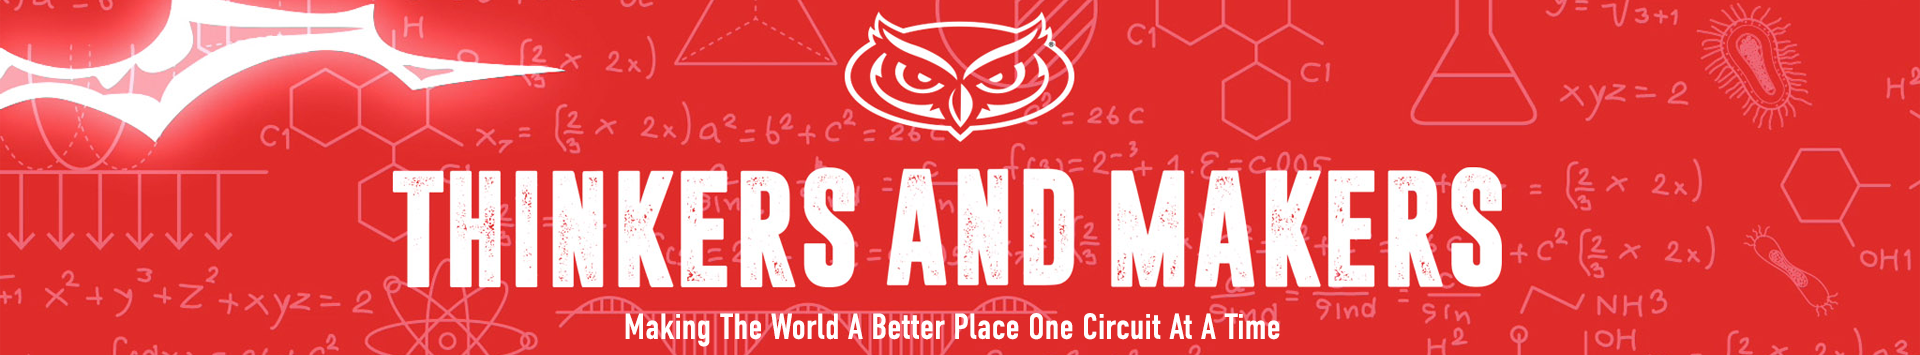 banner image - Thinkers and Makers: Making the world a Better Place One Circuit at a Time